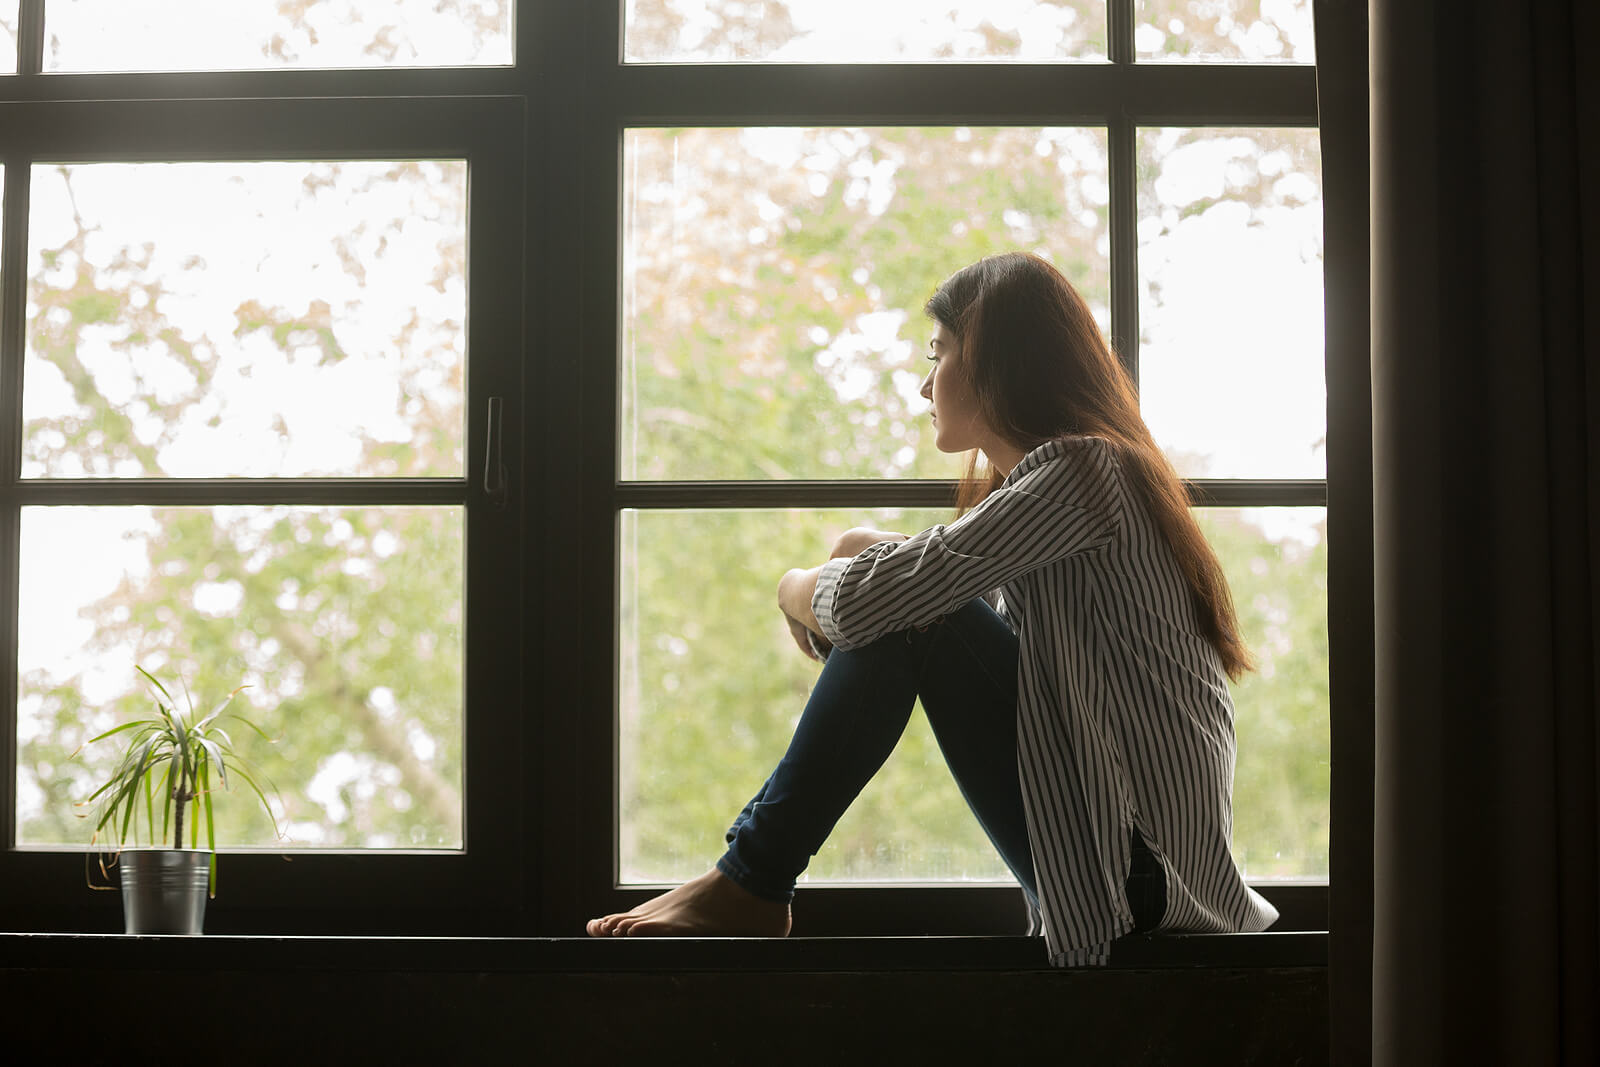 Image of a woman sitting on a window sill and looking out a window holding her knees. Discover how effectively anxiety therapy in Saint Petersburg, FL can help you control your panic attacks and find your triggers.